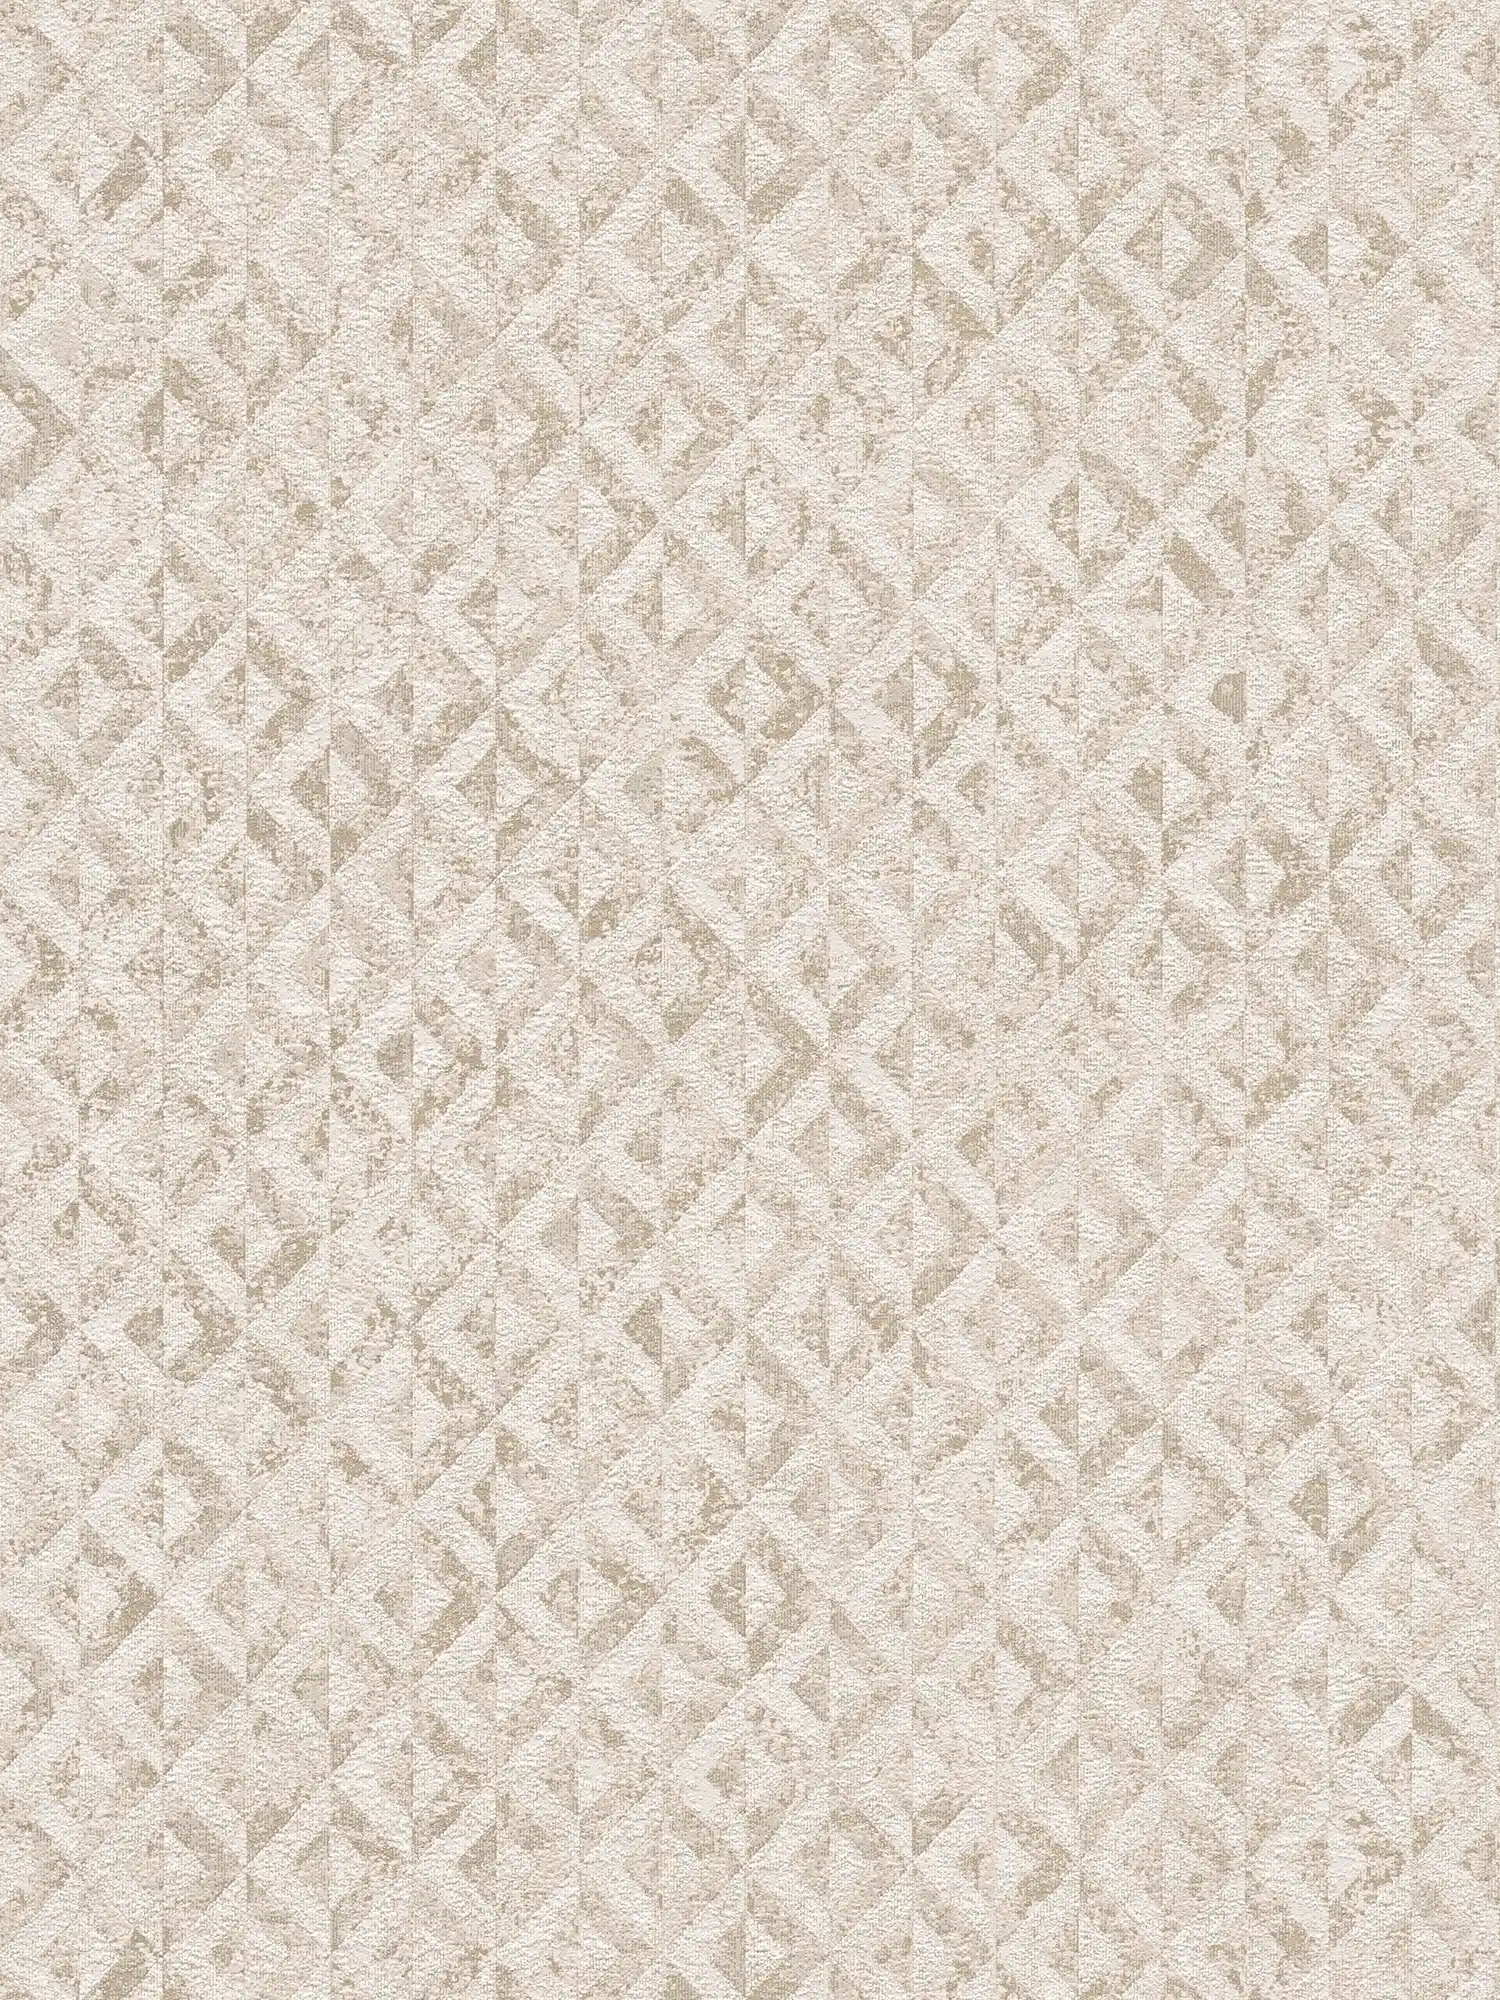         Patterned wallpaper with abstract ornaments - white, gold
    